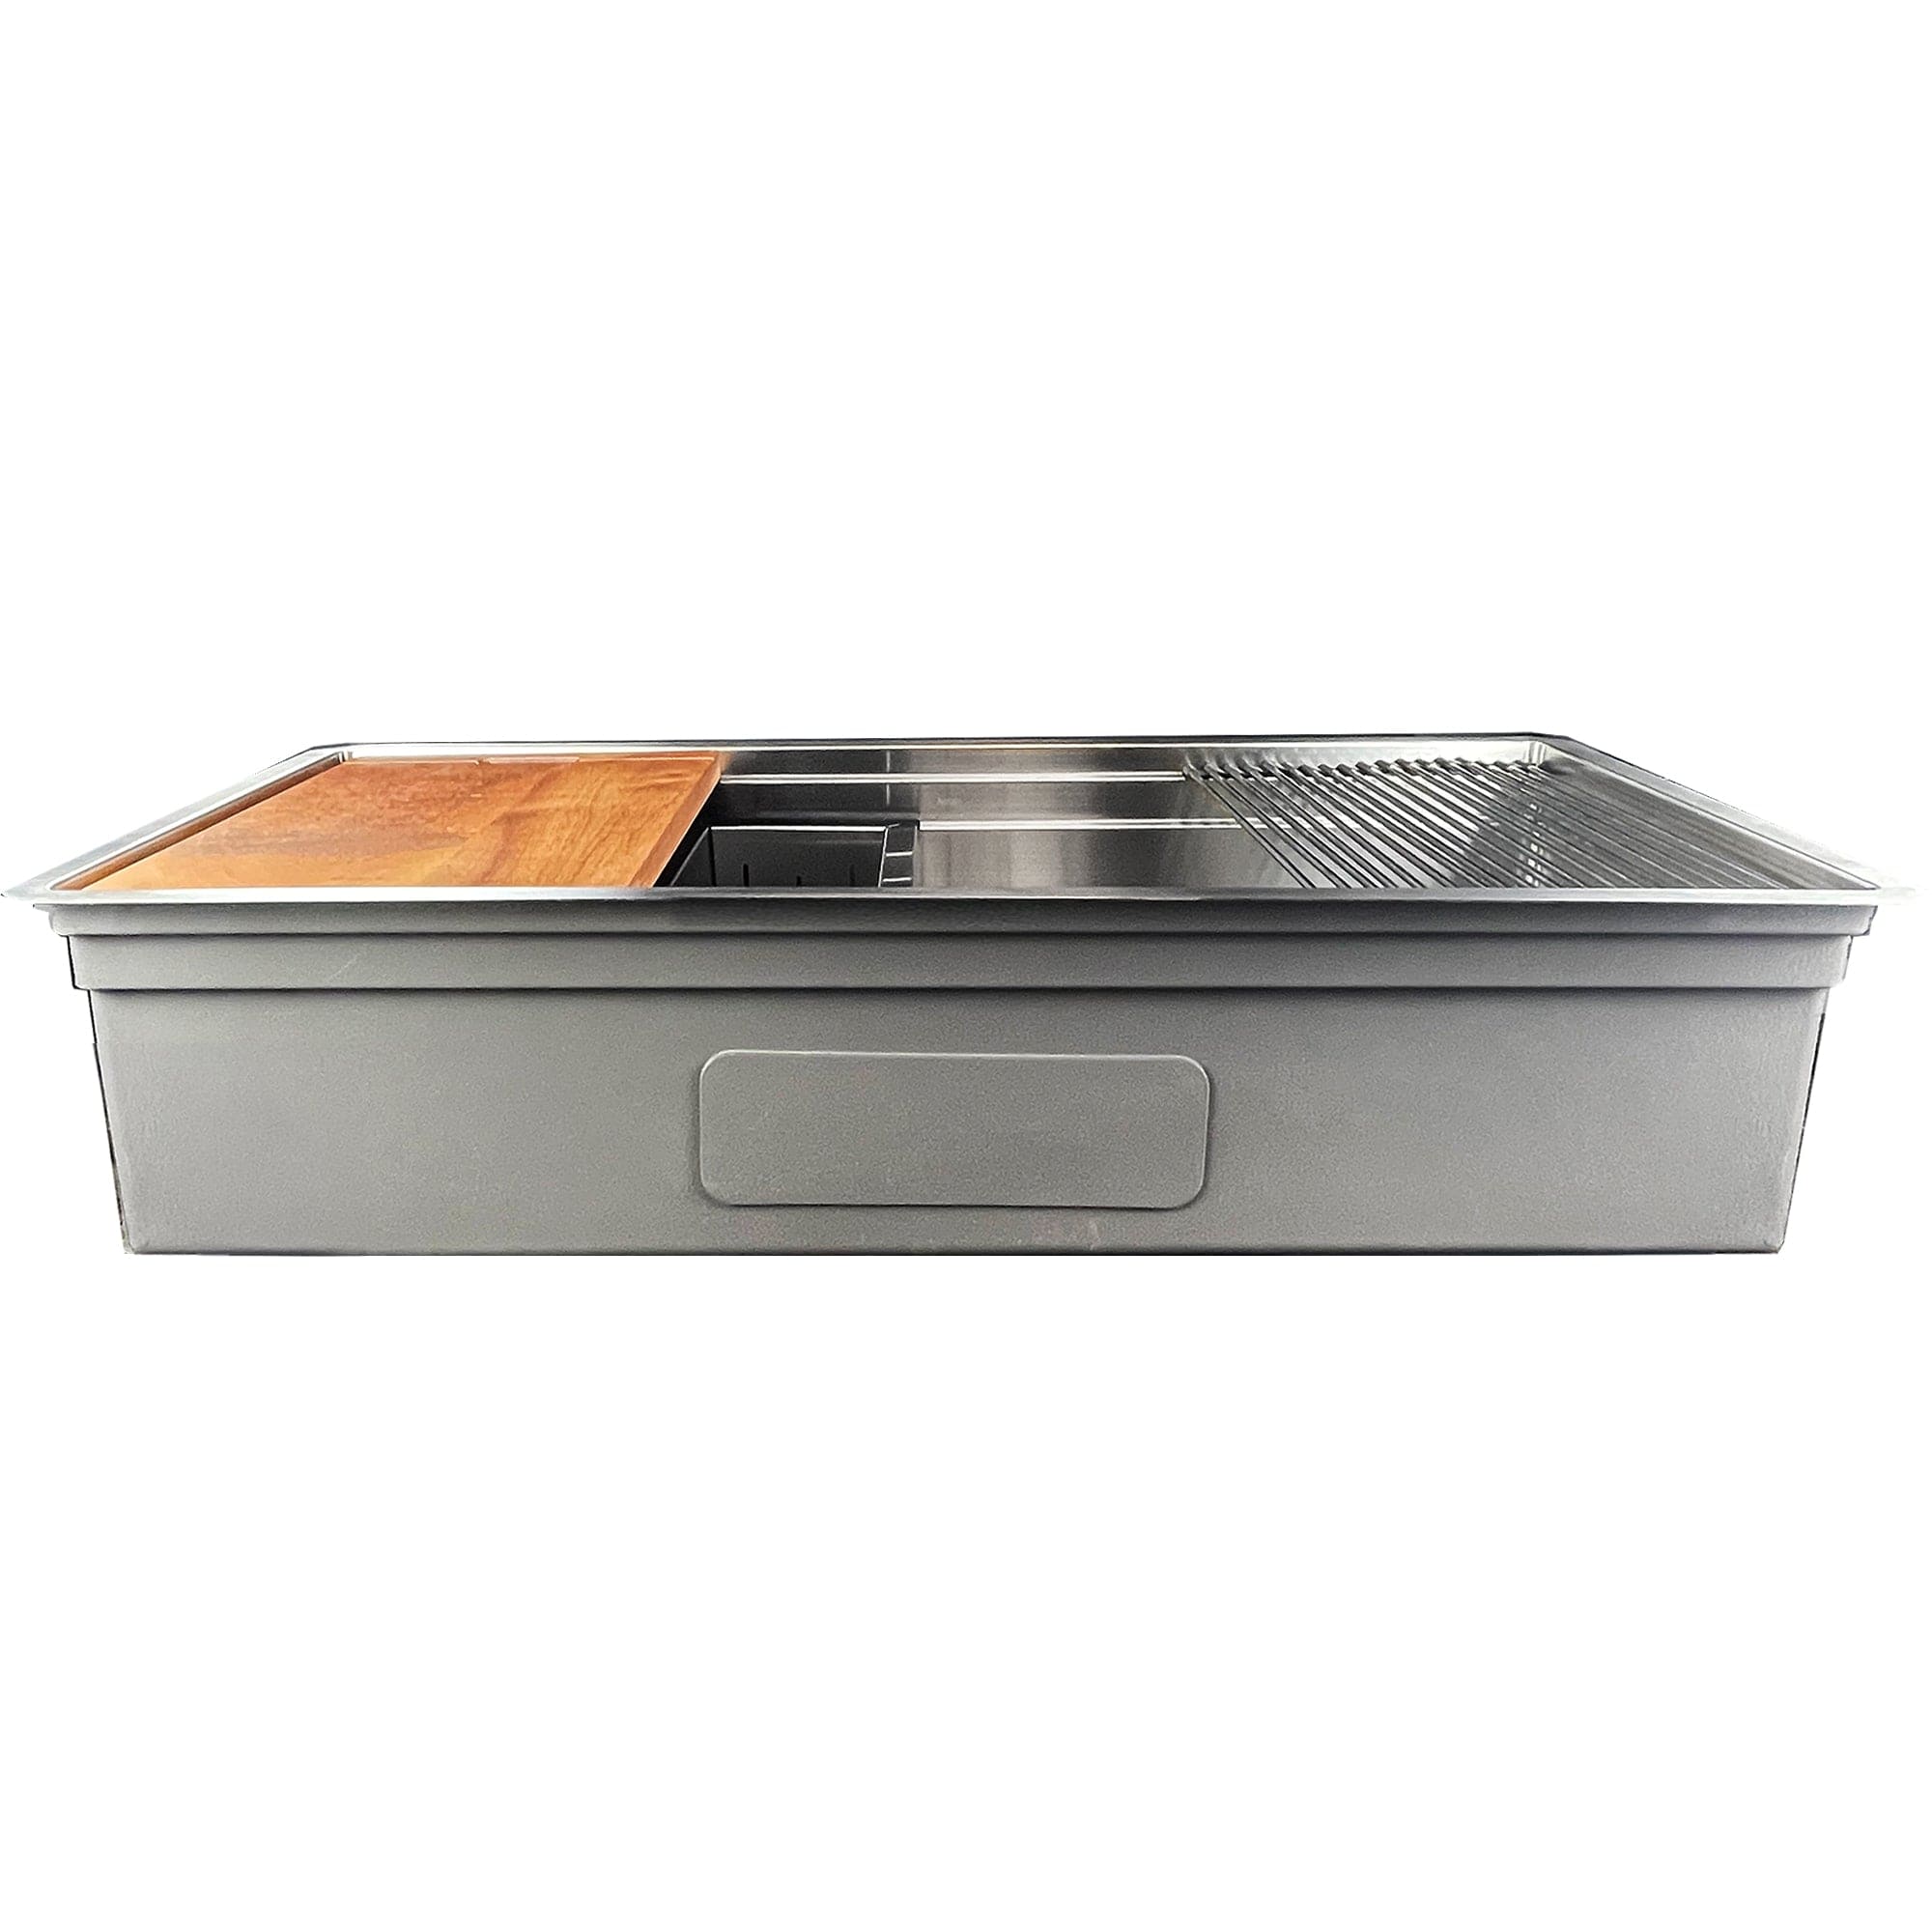 Nantucket 42" Pro Series Large Prep Station Single Bowl Stainless Steel Kitchen Sink with Compatible Accessories - SR-PS-4220-16